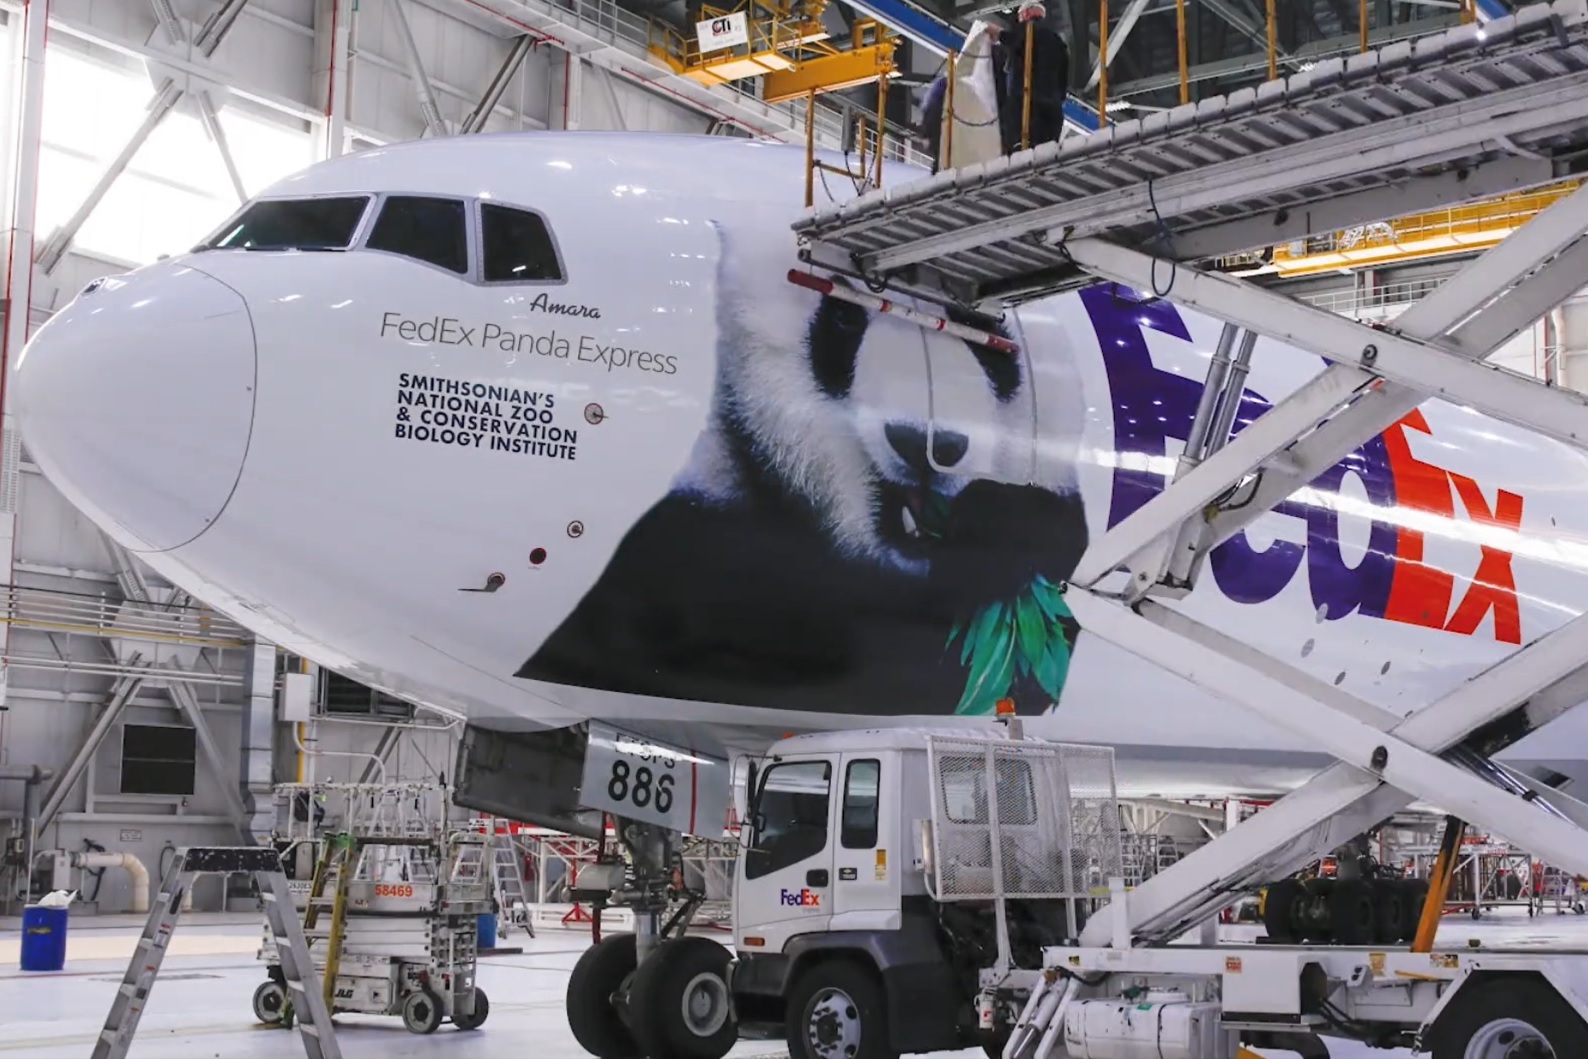 The Boeing 777F has become the “FedEx Panda Express” to cross part of the world on a very special mission